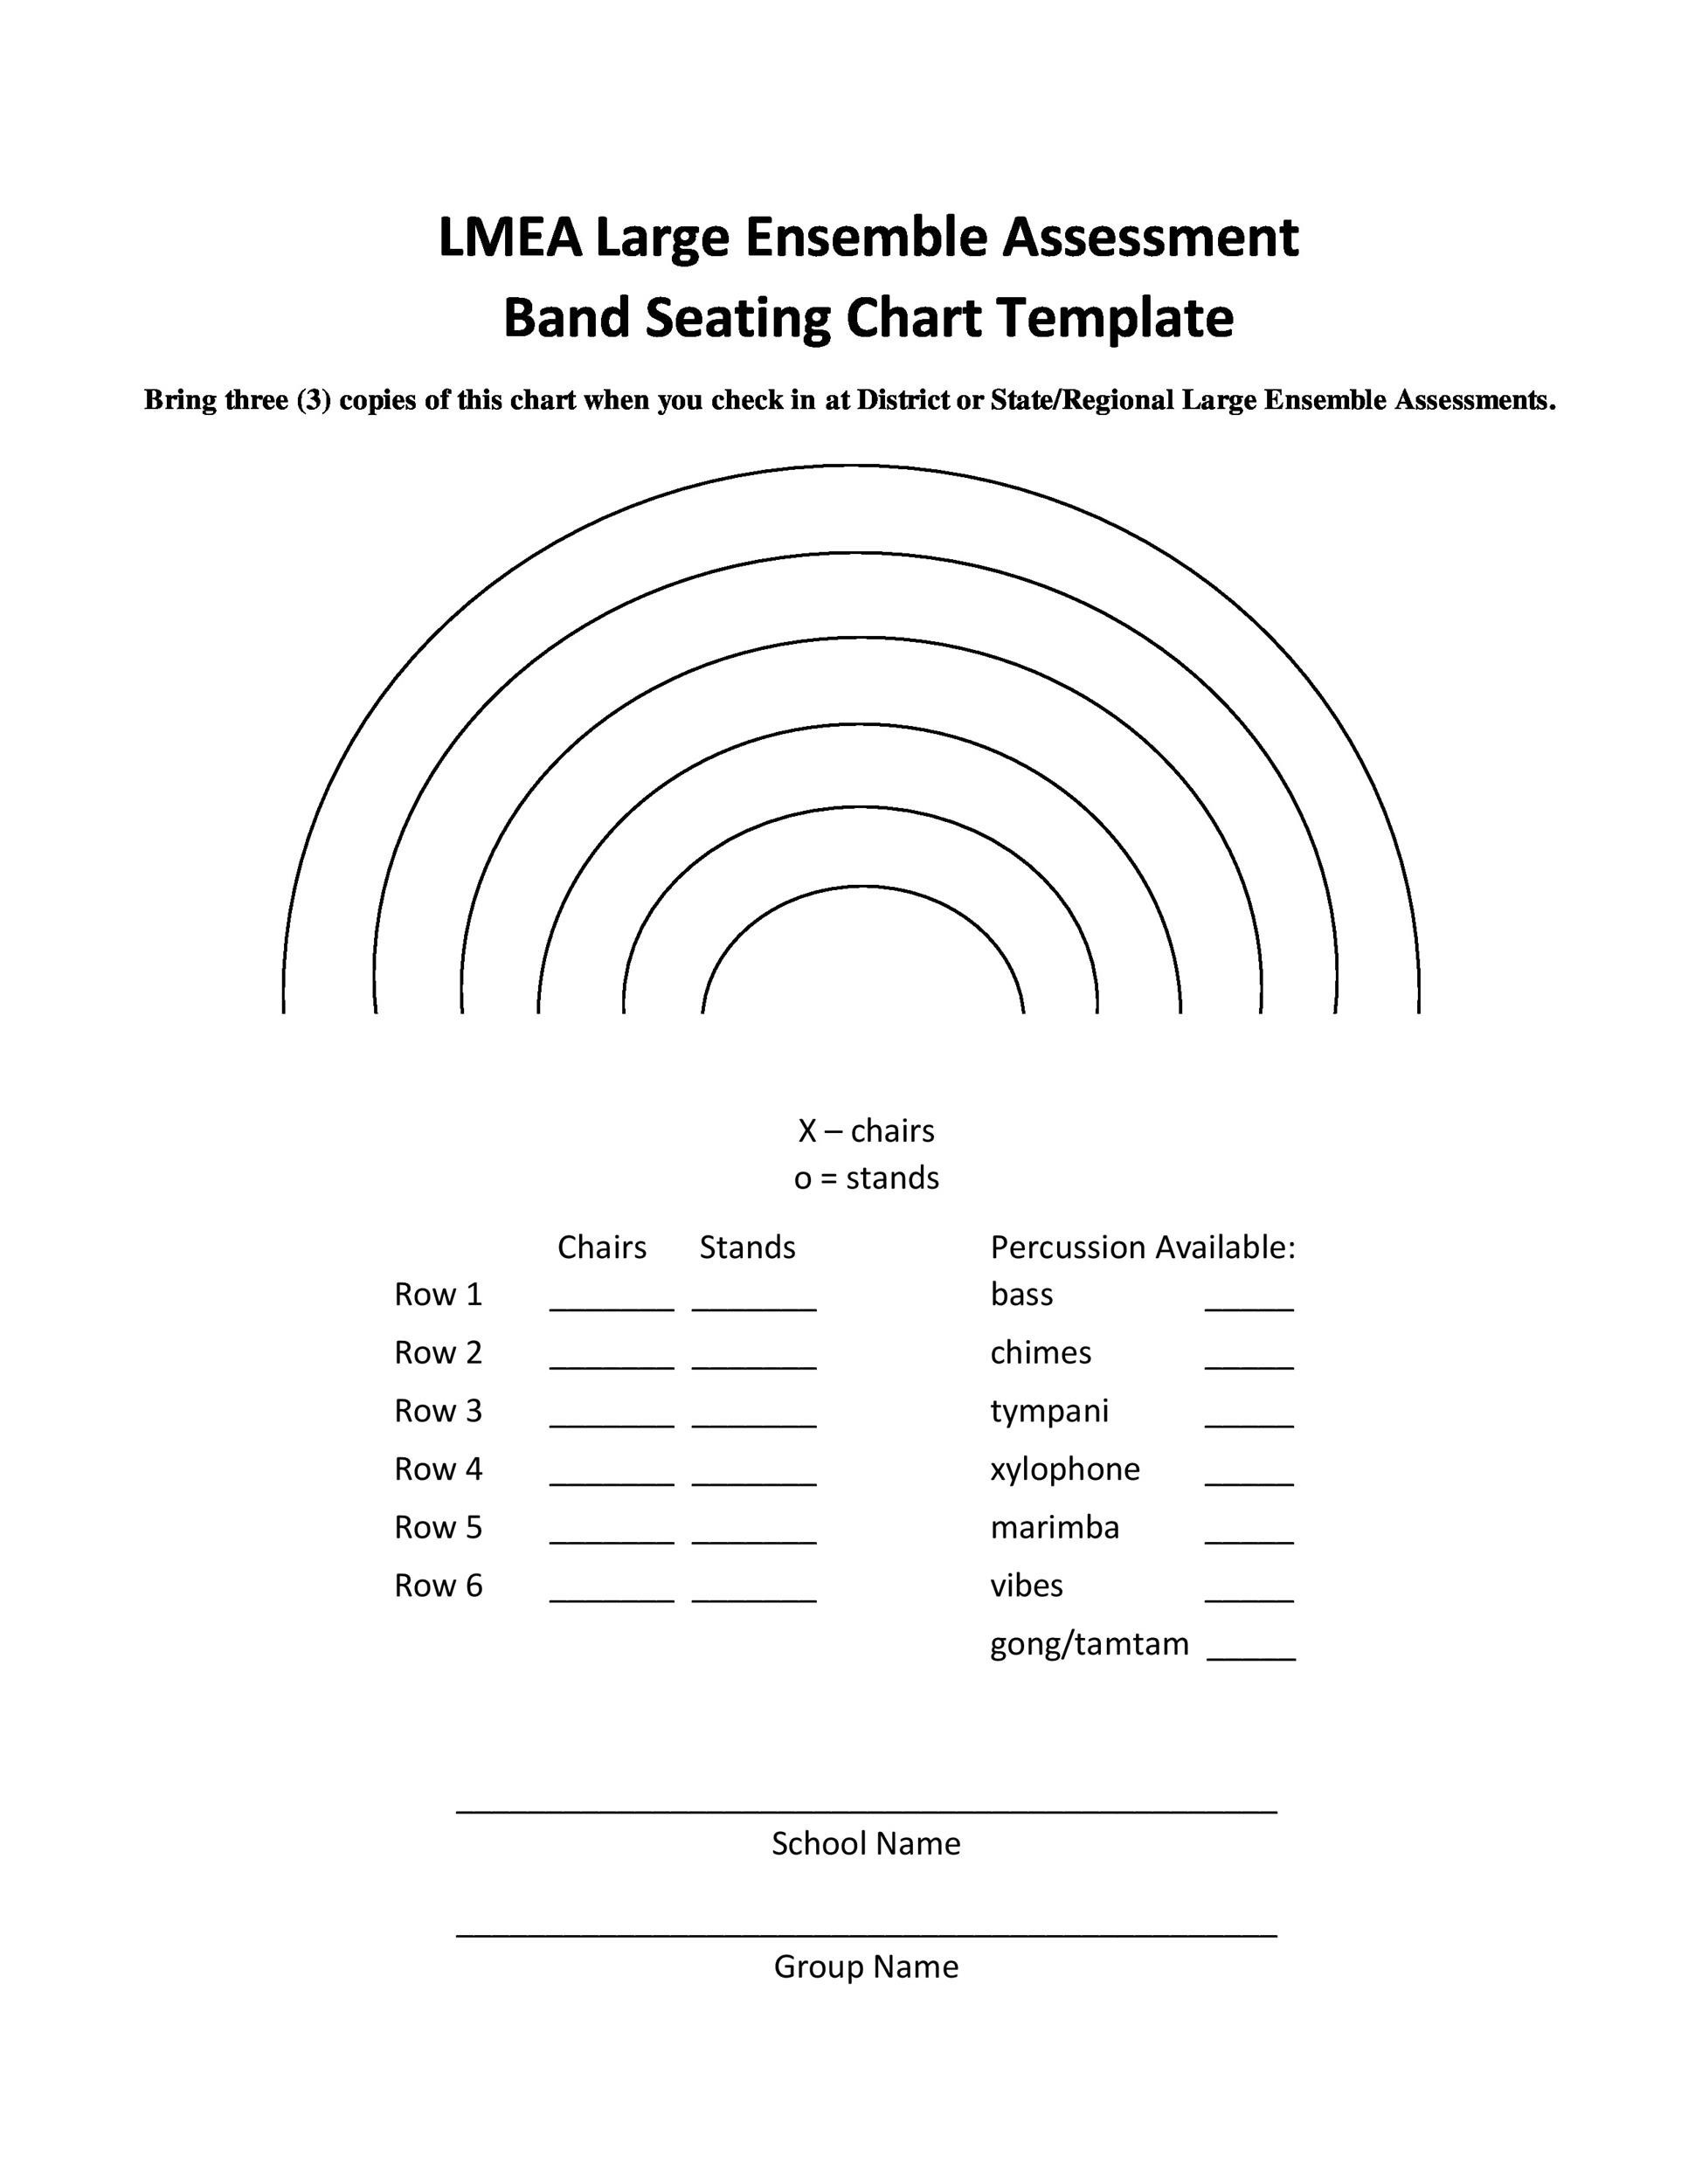 Wedding Ceremony Seating Chart Template